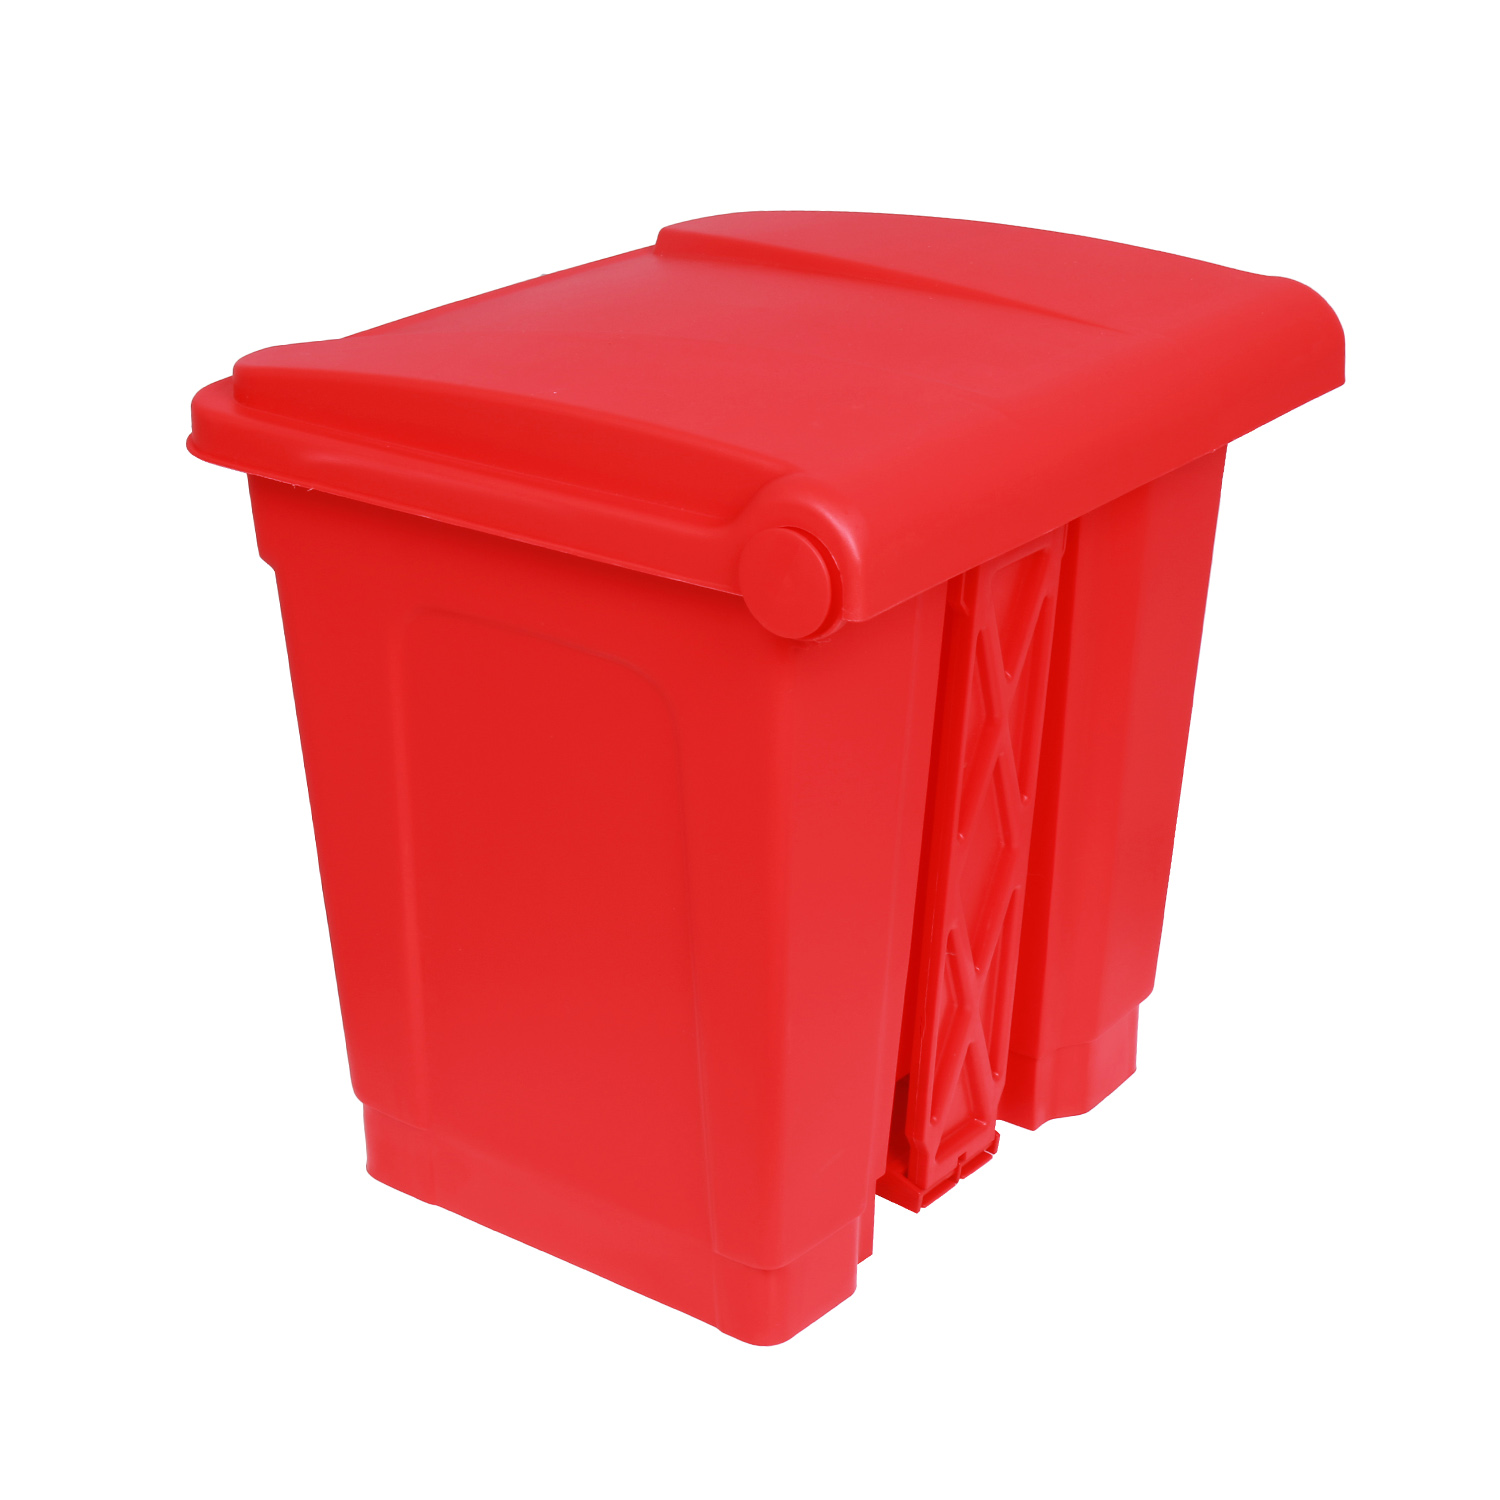 30Liter Recyclable Industrial Waste Bin With Pedal Control KL-34